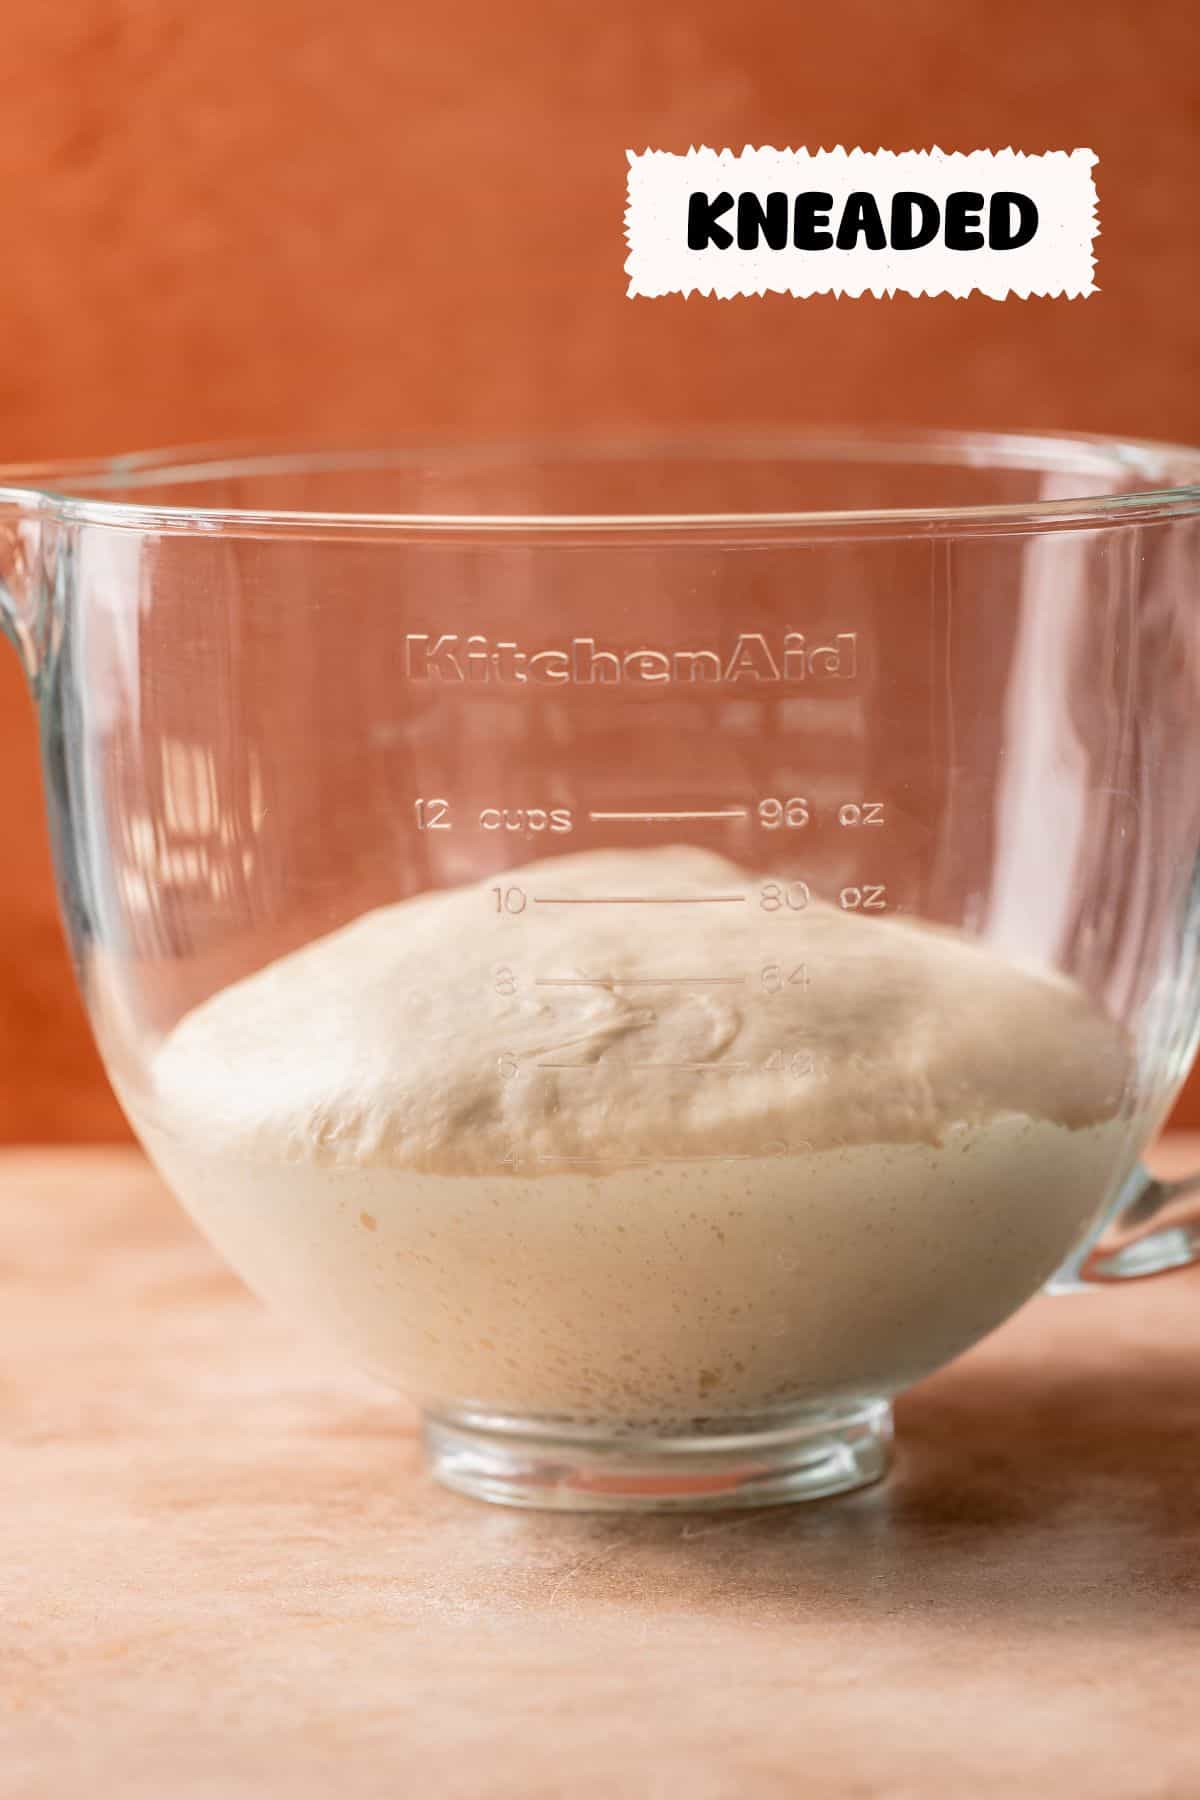 A glass mixing bowl with the kneaded dough after it has risen.